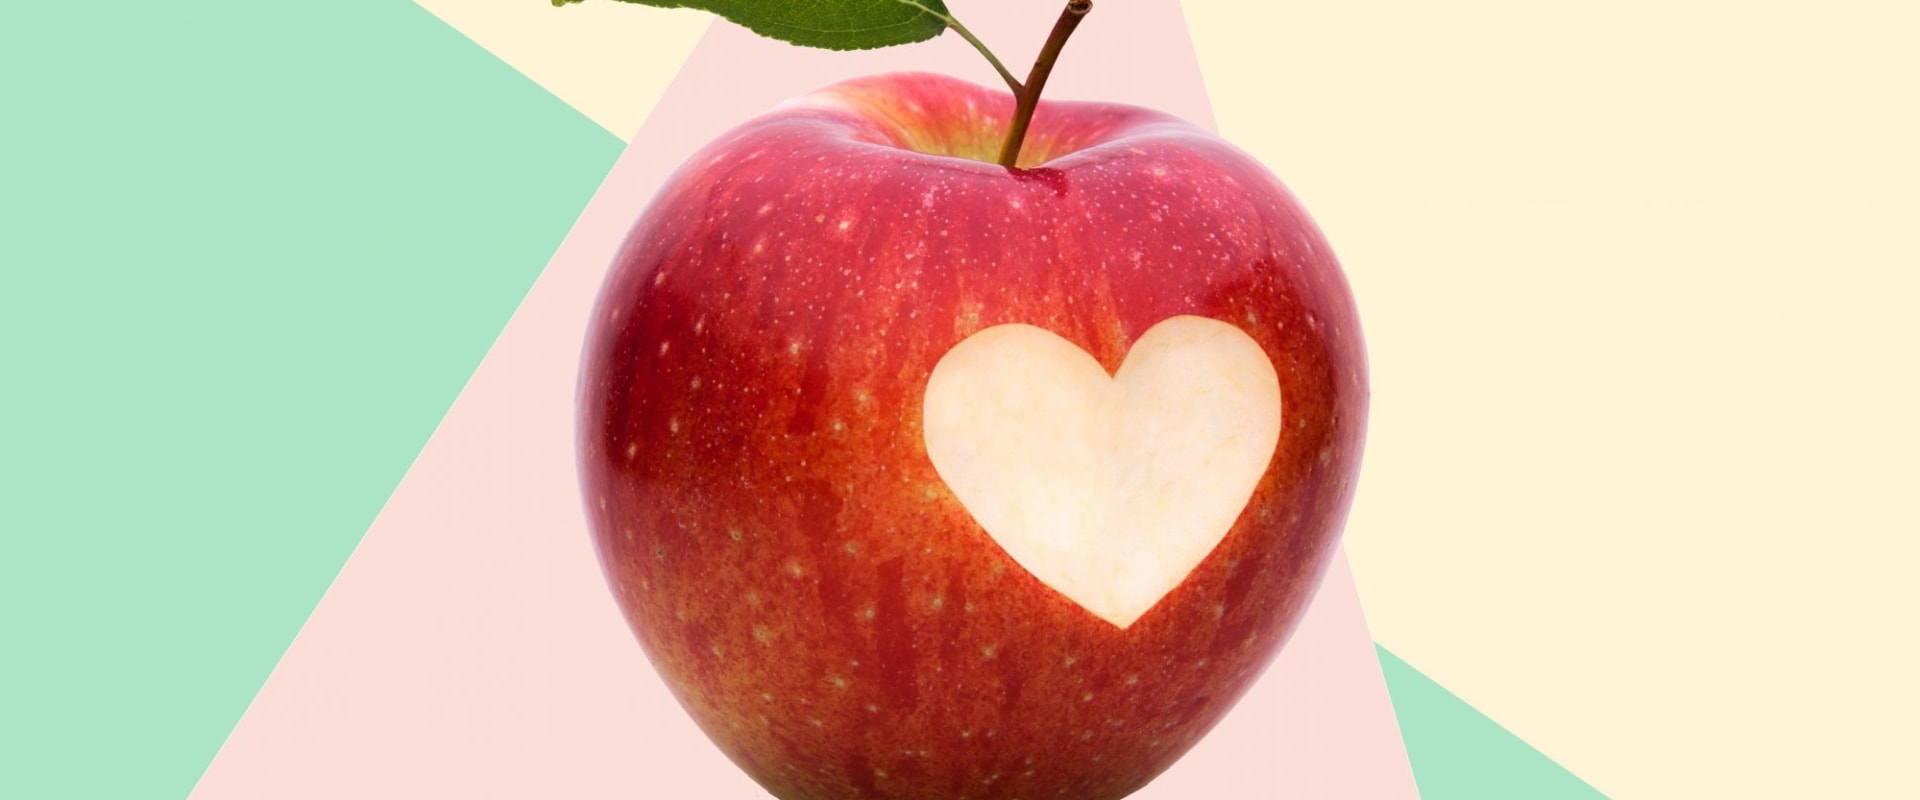 Are apples good for lung health?